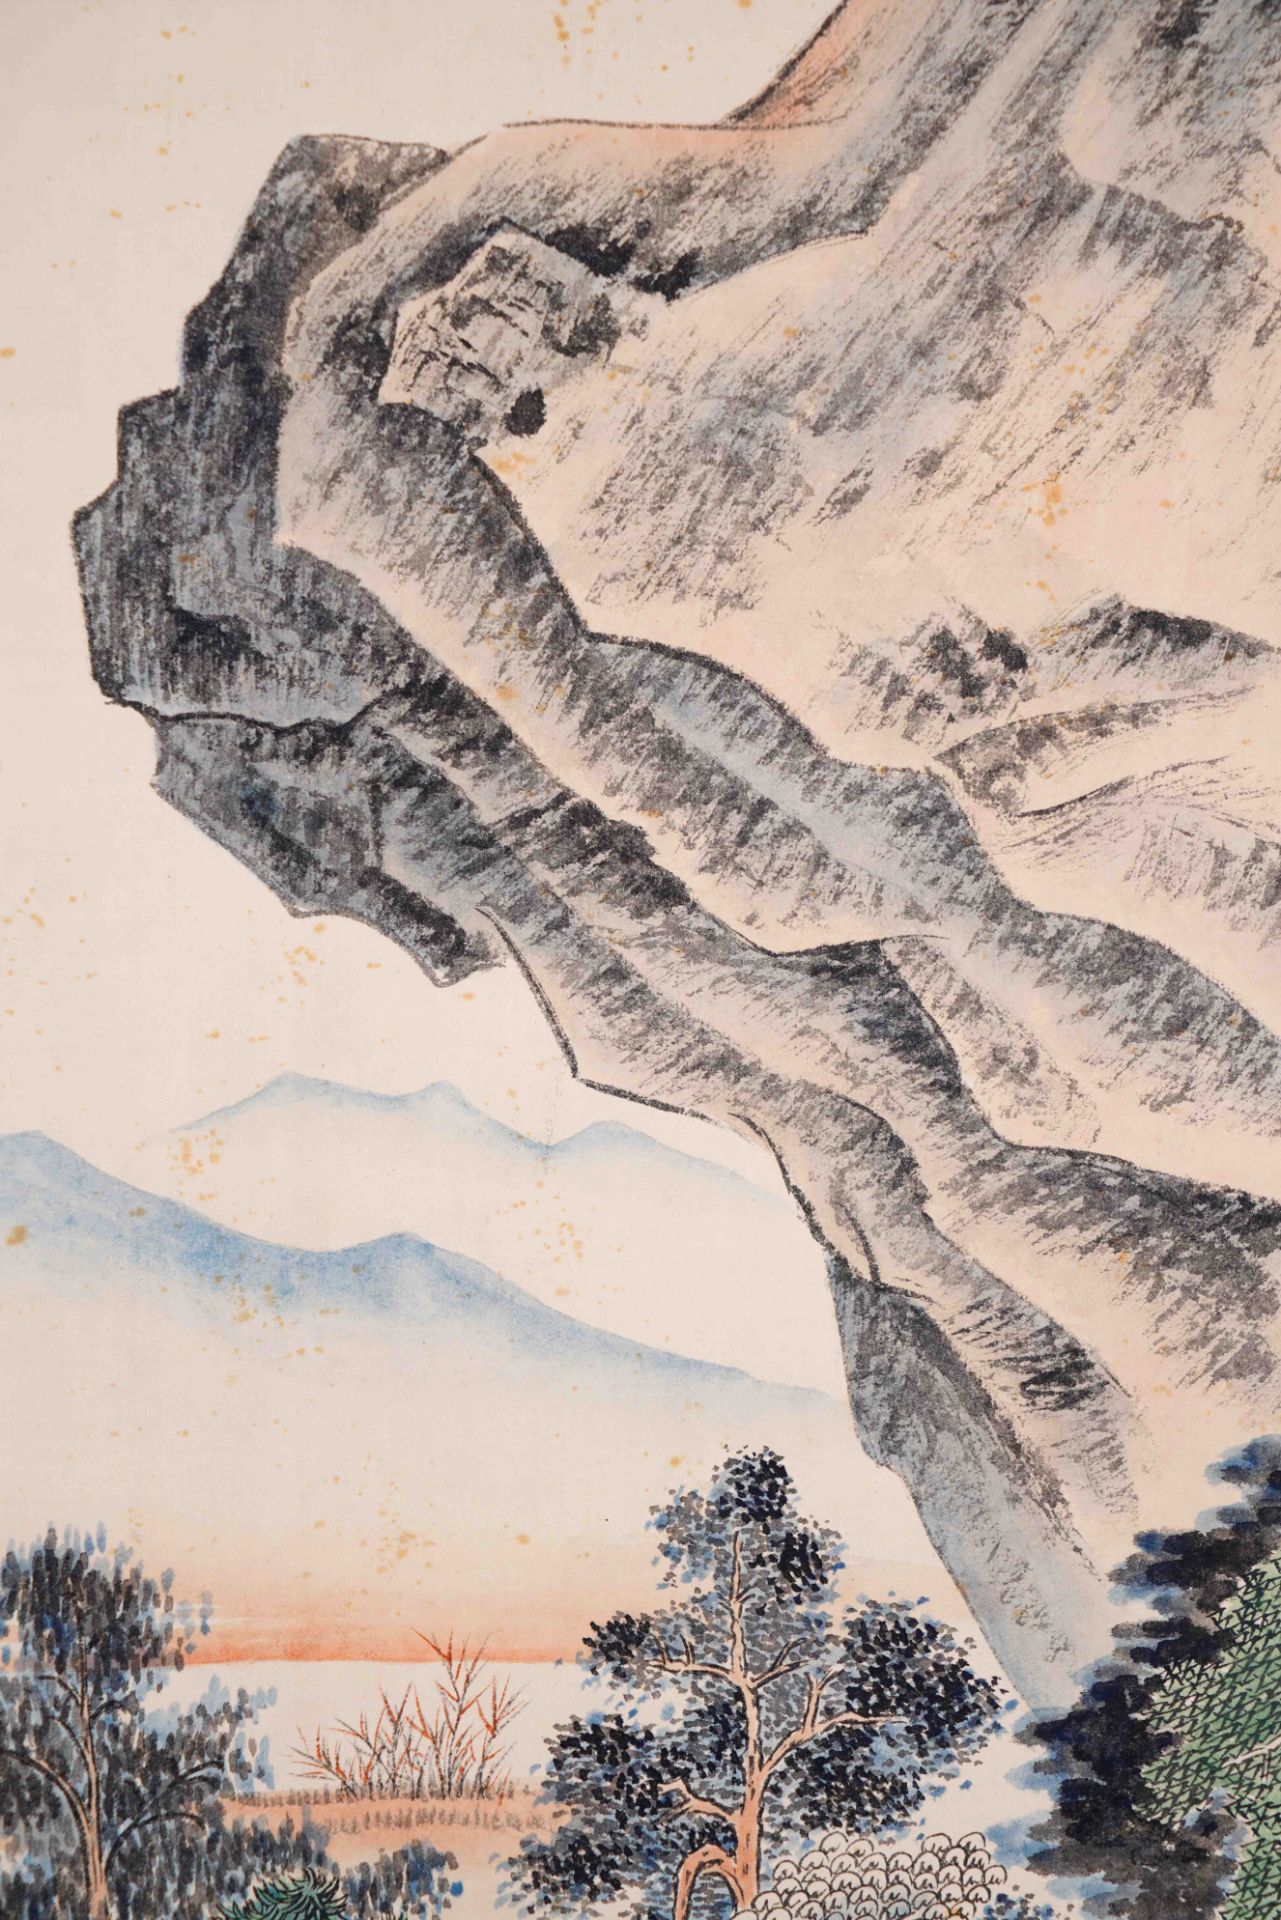 A Chinese Frame Painting By Zhang Daqian - Image 4 of 9